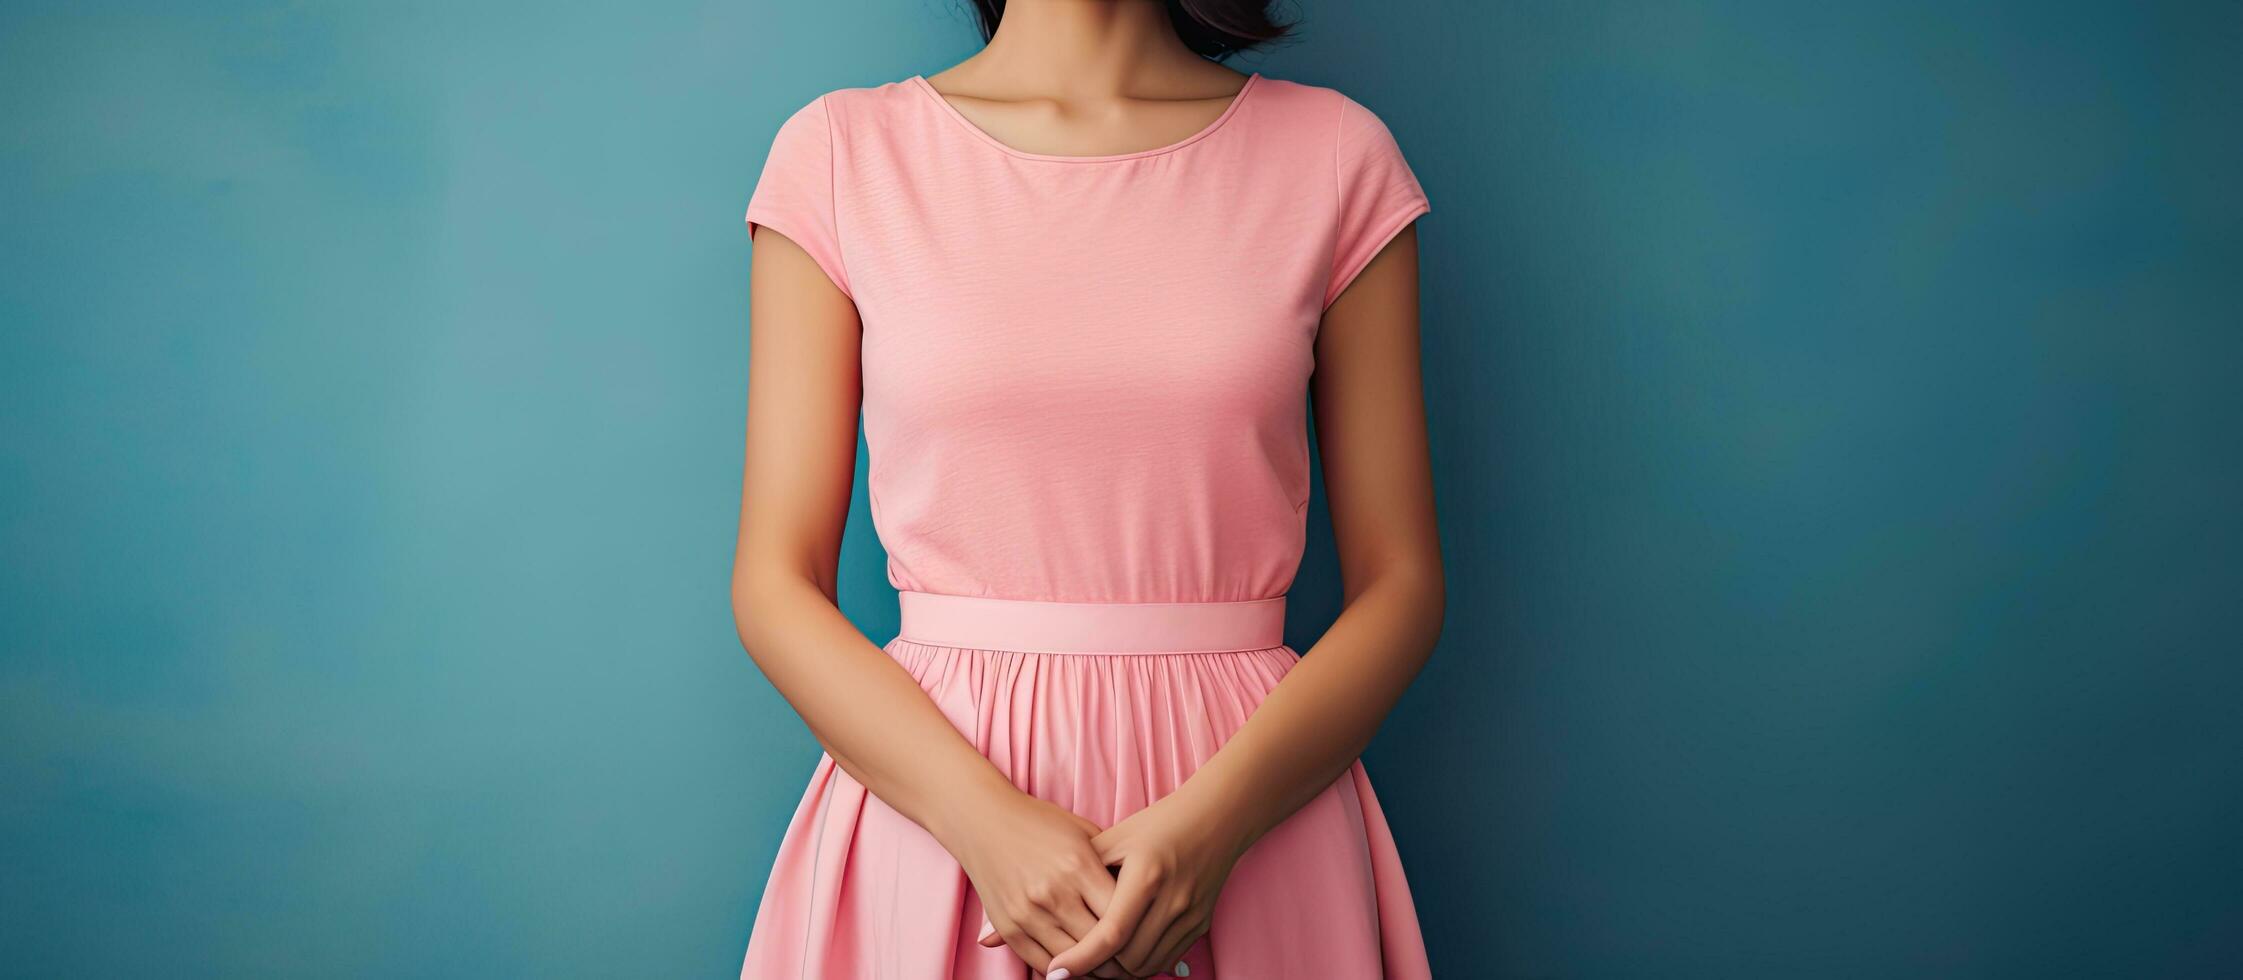 A young woman in a pink dress poses against a blue backdrop displaying a hand with space for text and placing the other hand on her waist photo